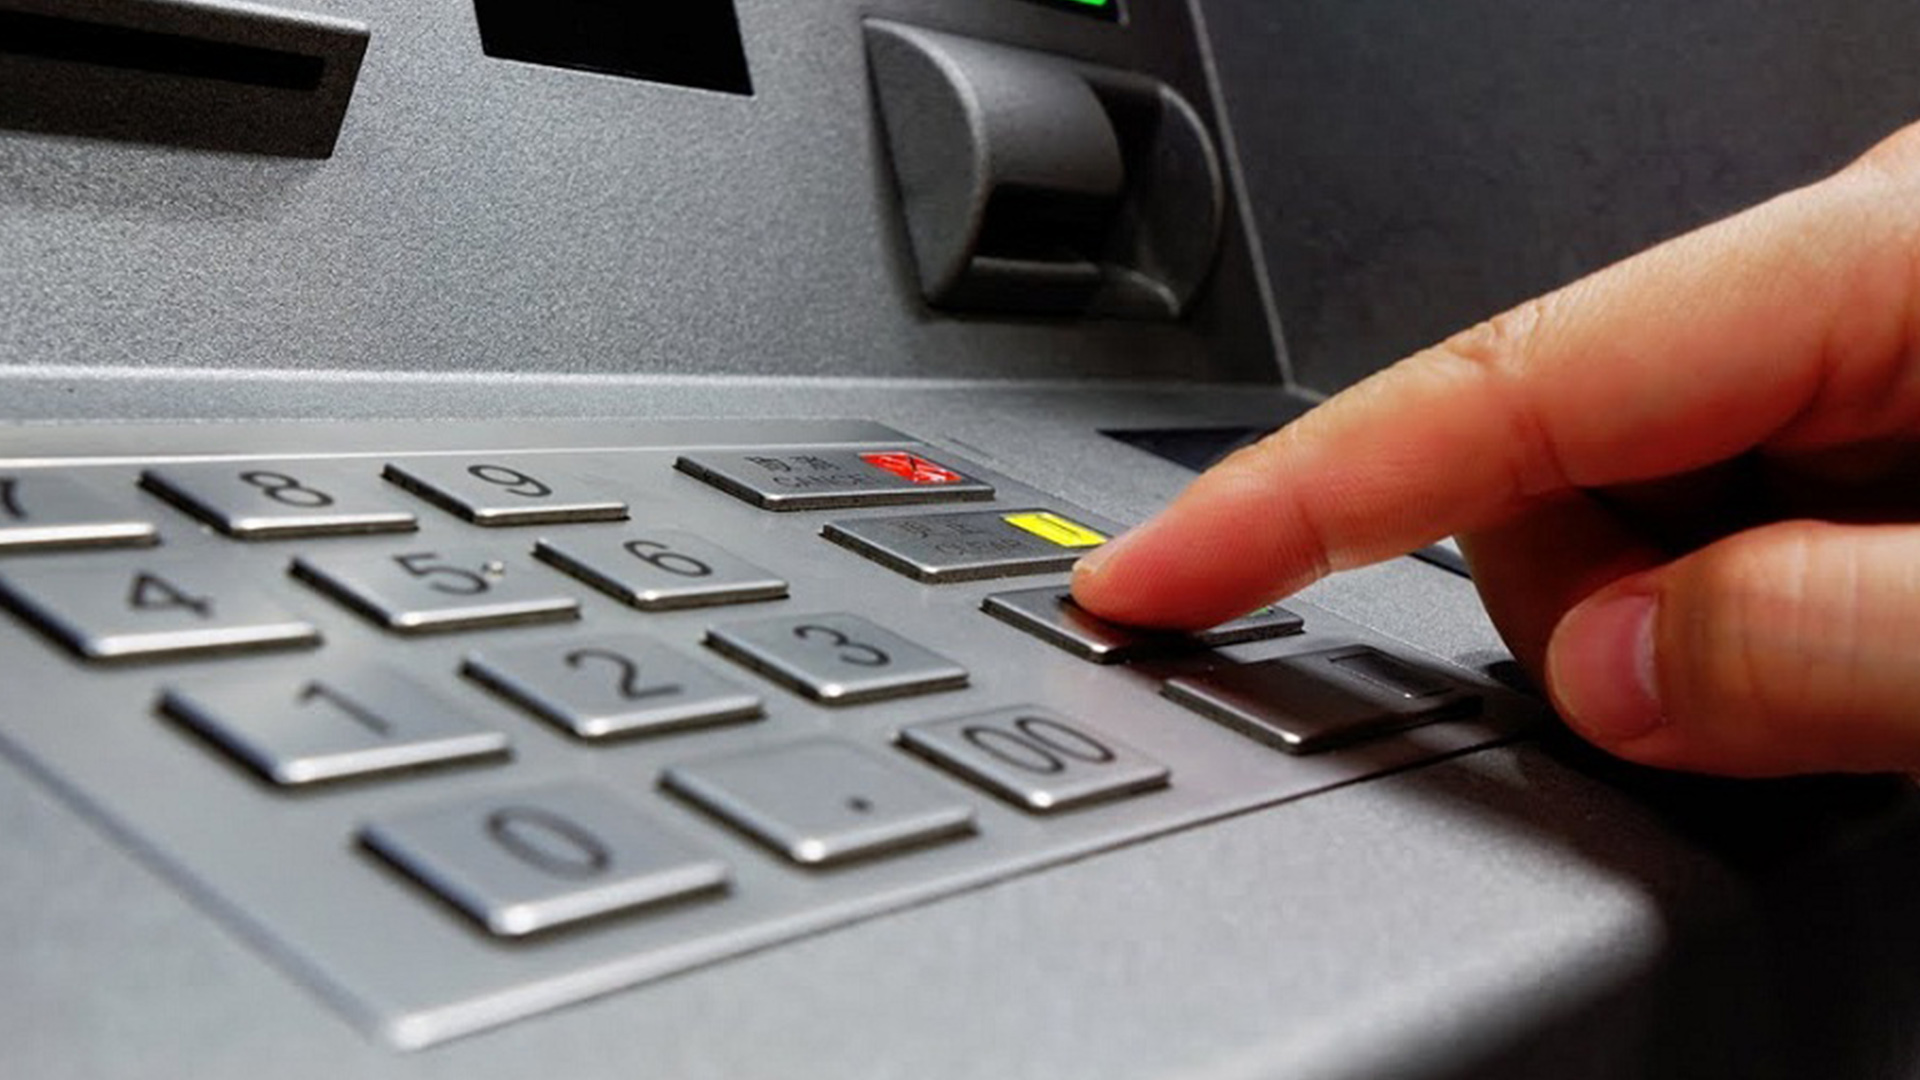 BFIs to Start Charging Fees for Inter-Bank ATM use